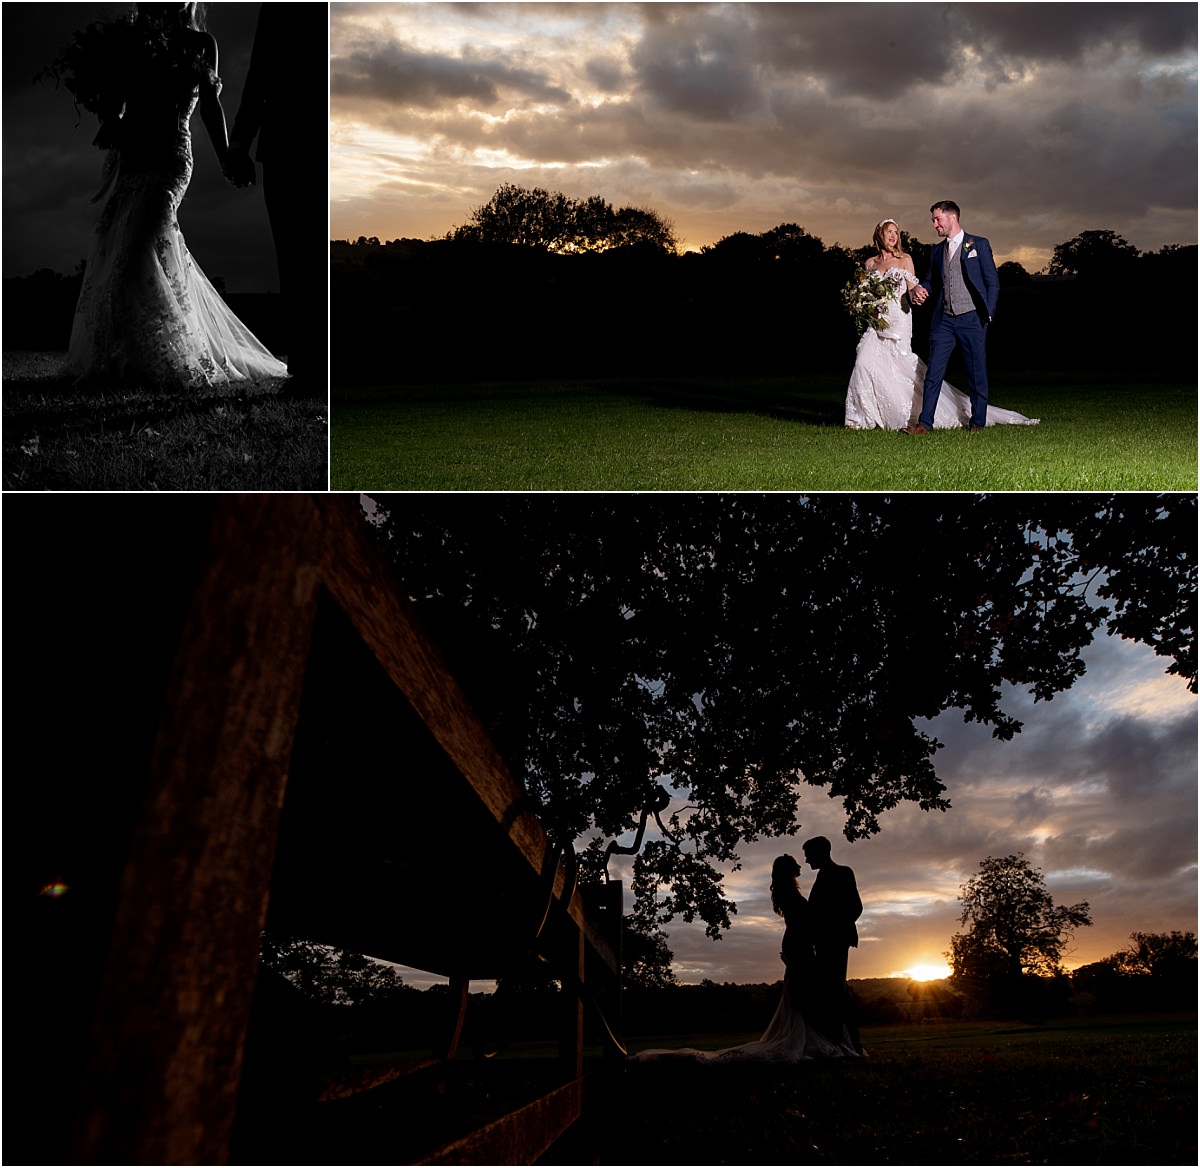 Wedding at Shottle Hall silhouettes 